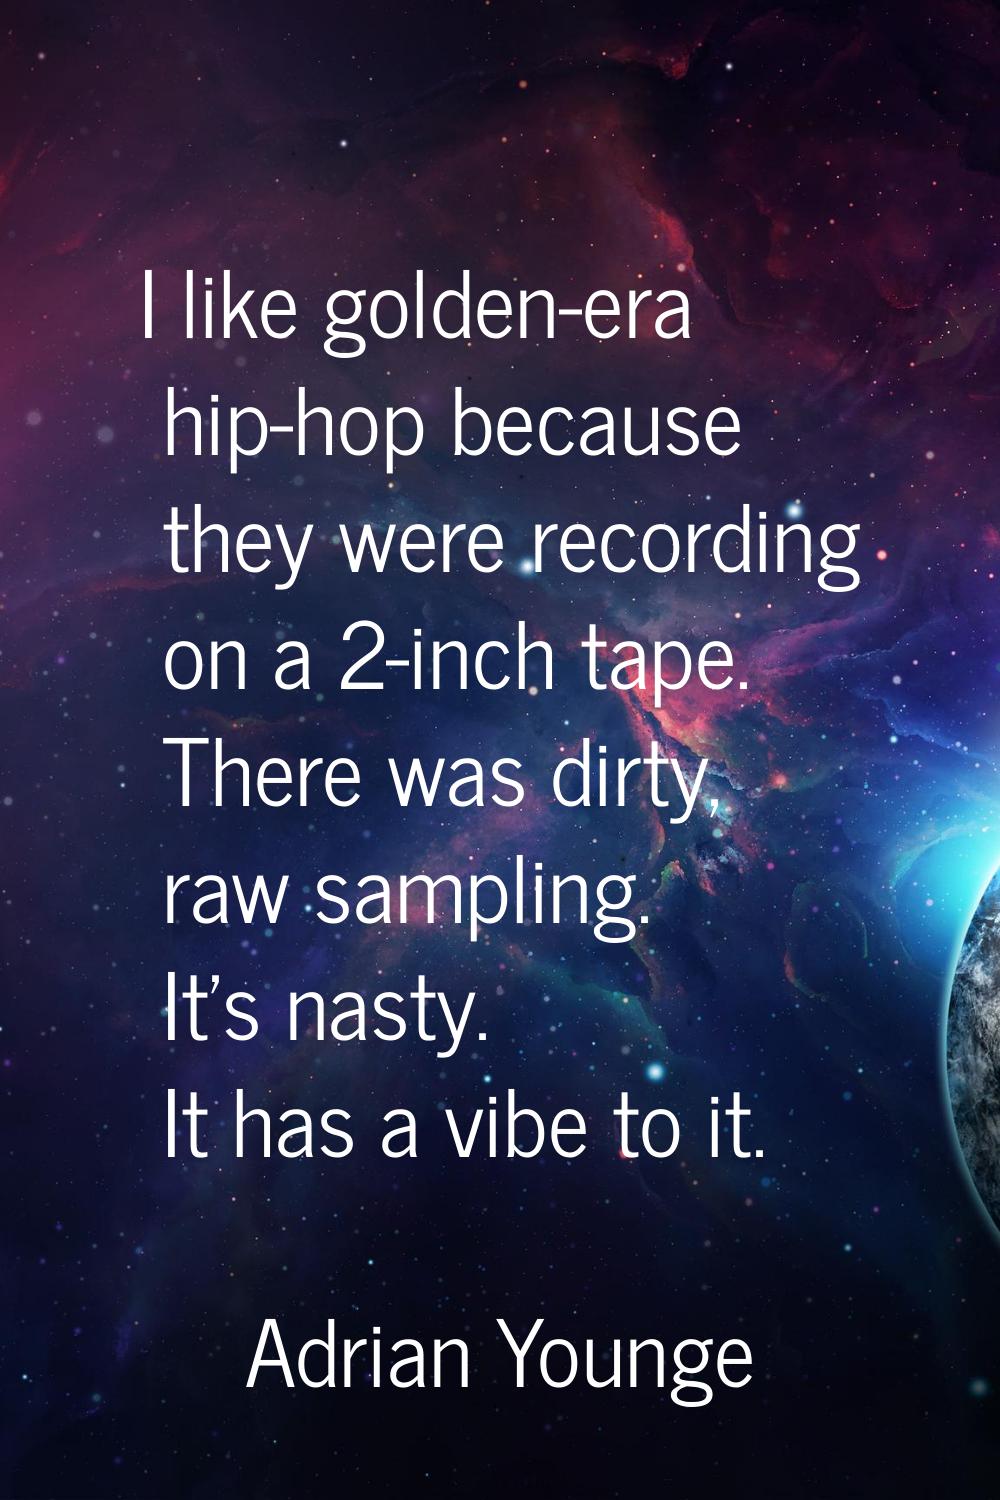 I like golden-era hip-hop because they were recording on a 2-inch tape. There was dirty, raw sampli